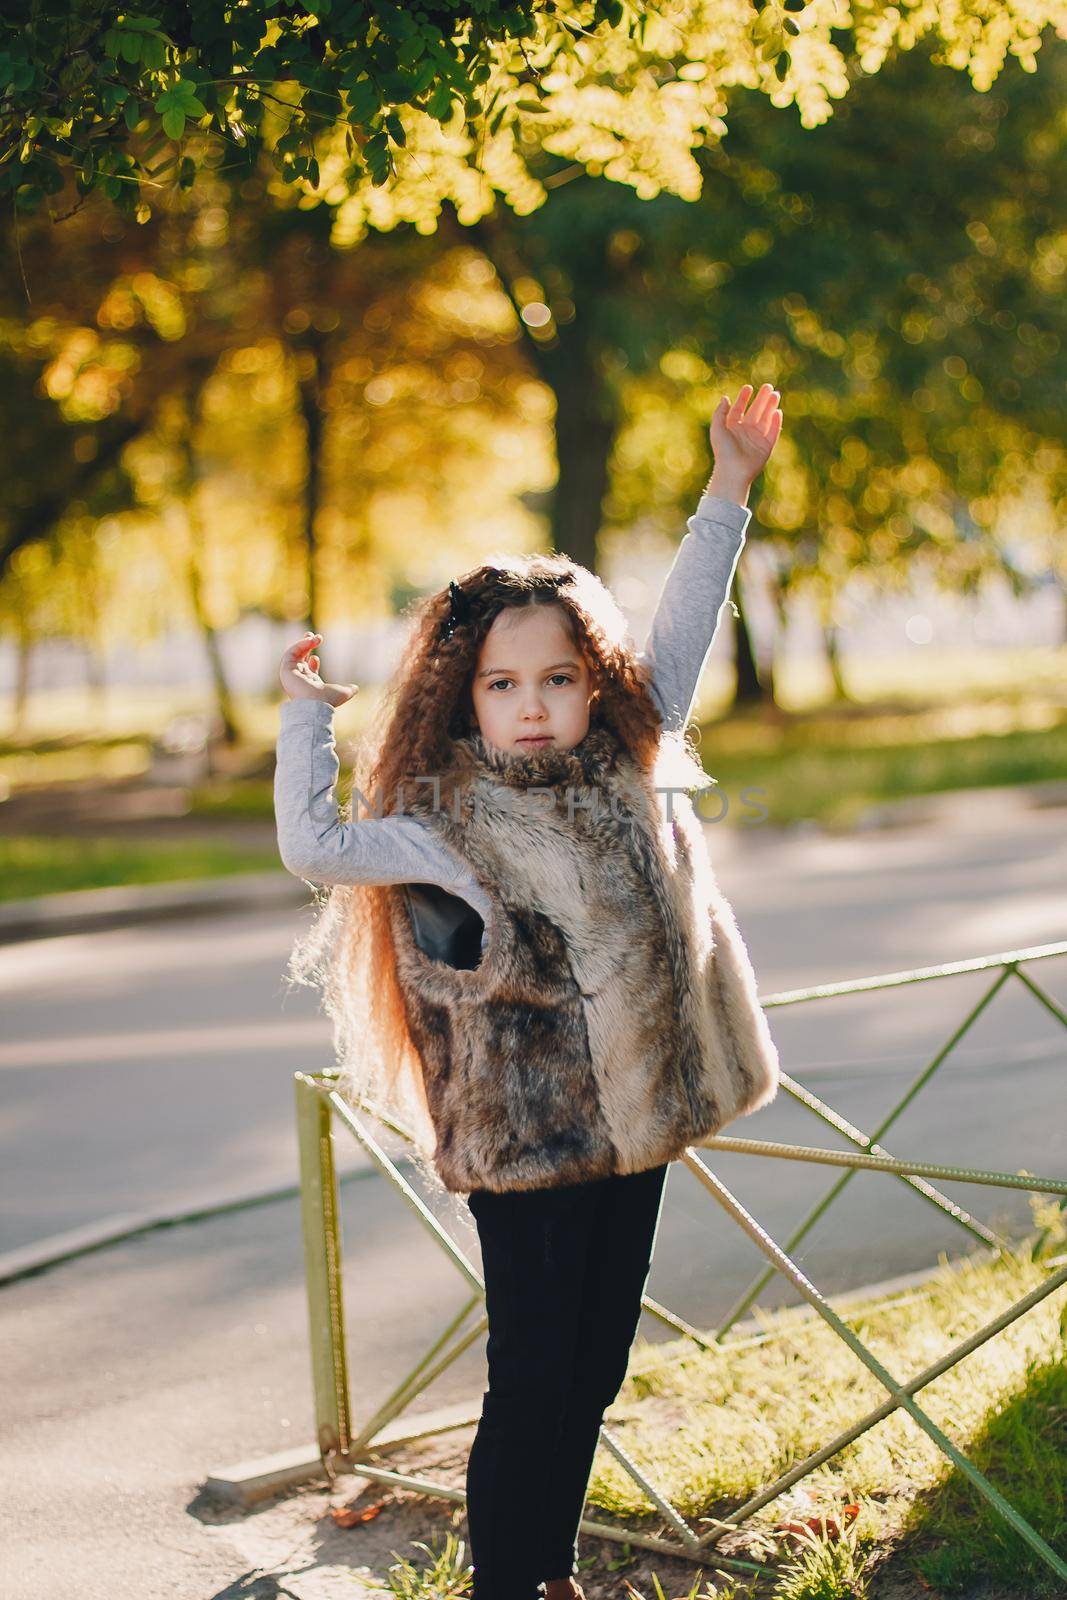 Stylish baby girl 4-5 year old wearing boots, fur coat standing in park. Looking at camera. Autumn fall season.